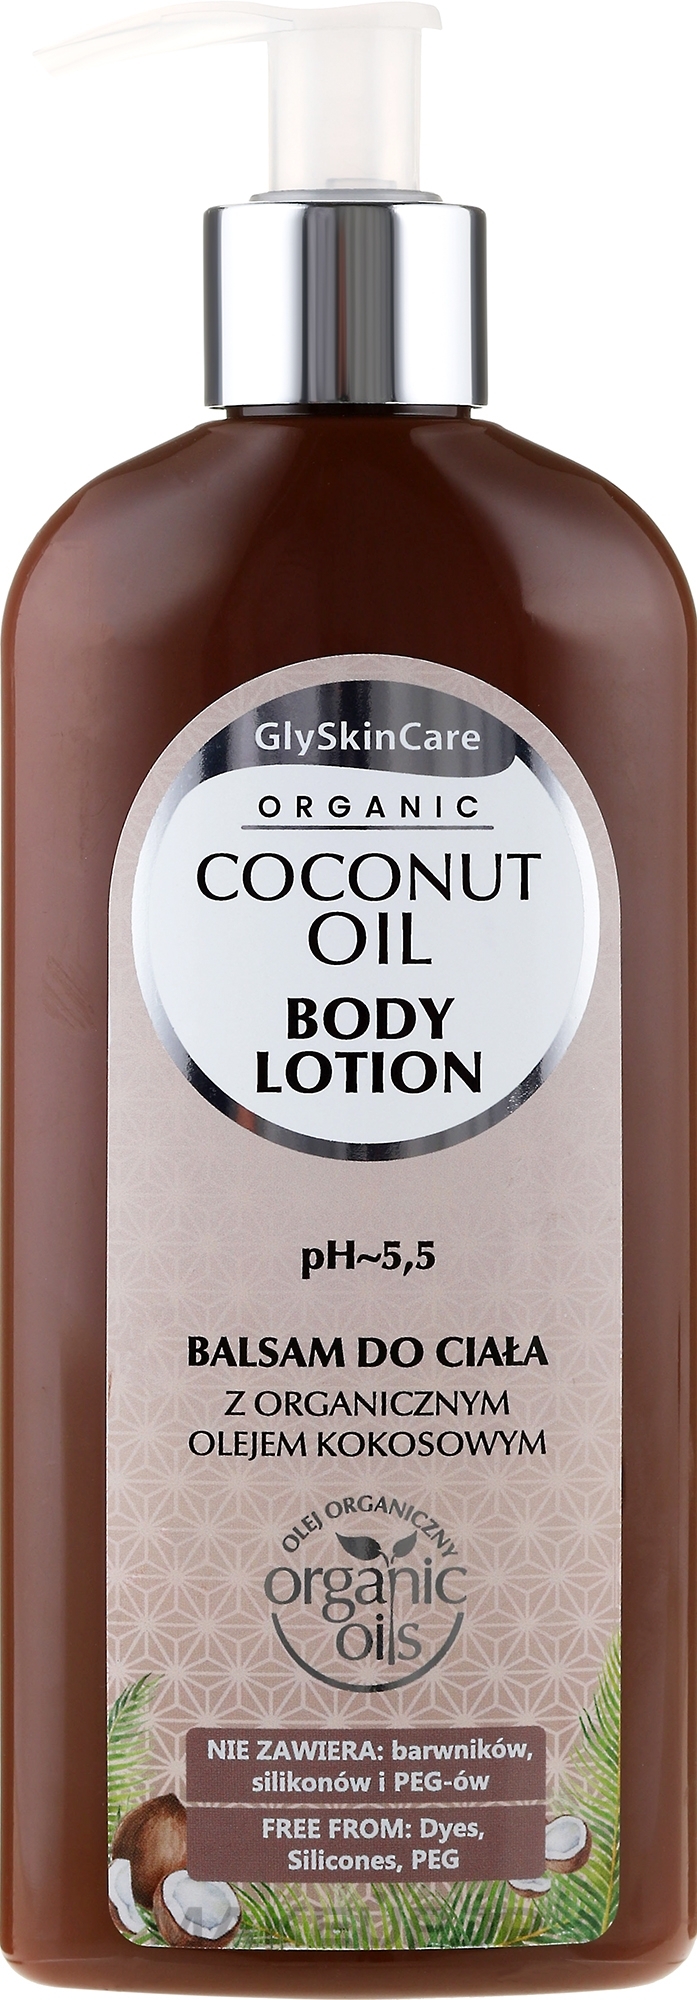 Body Lotion with Organic Coconut Oil - GlySkinCare Coconut Oil Body Lotion — photo 250 ml